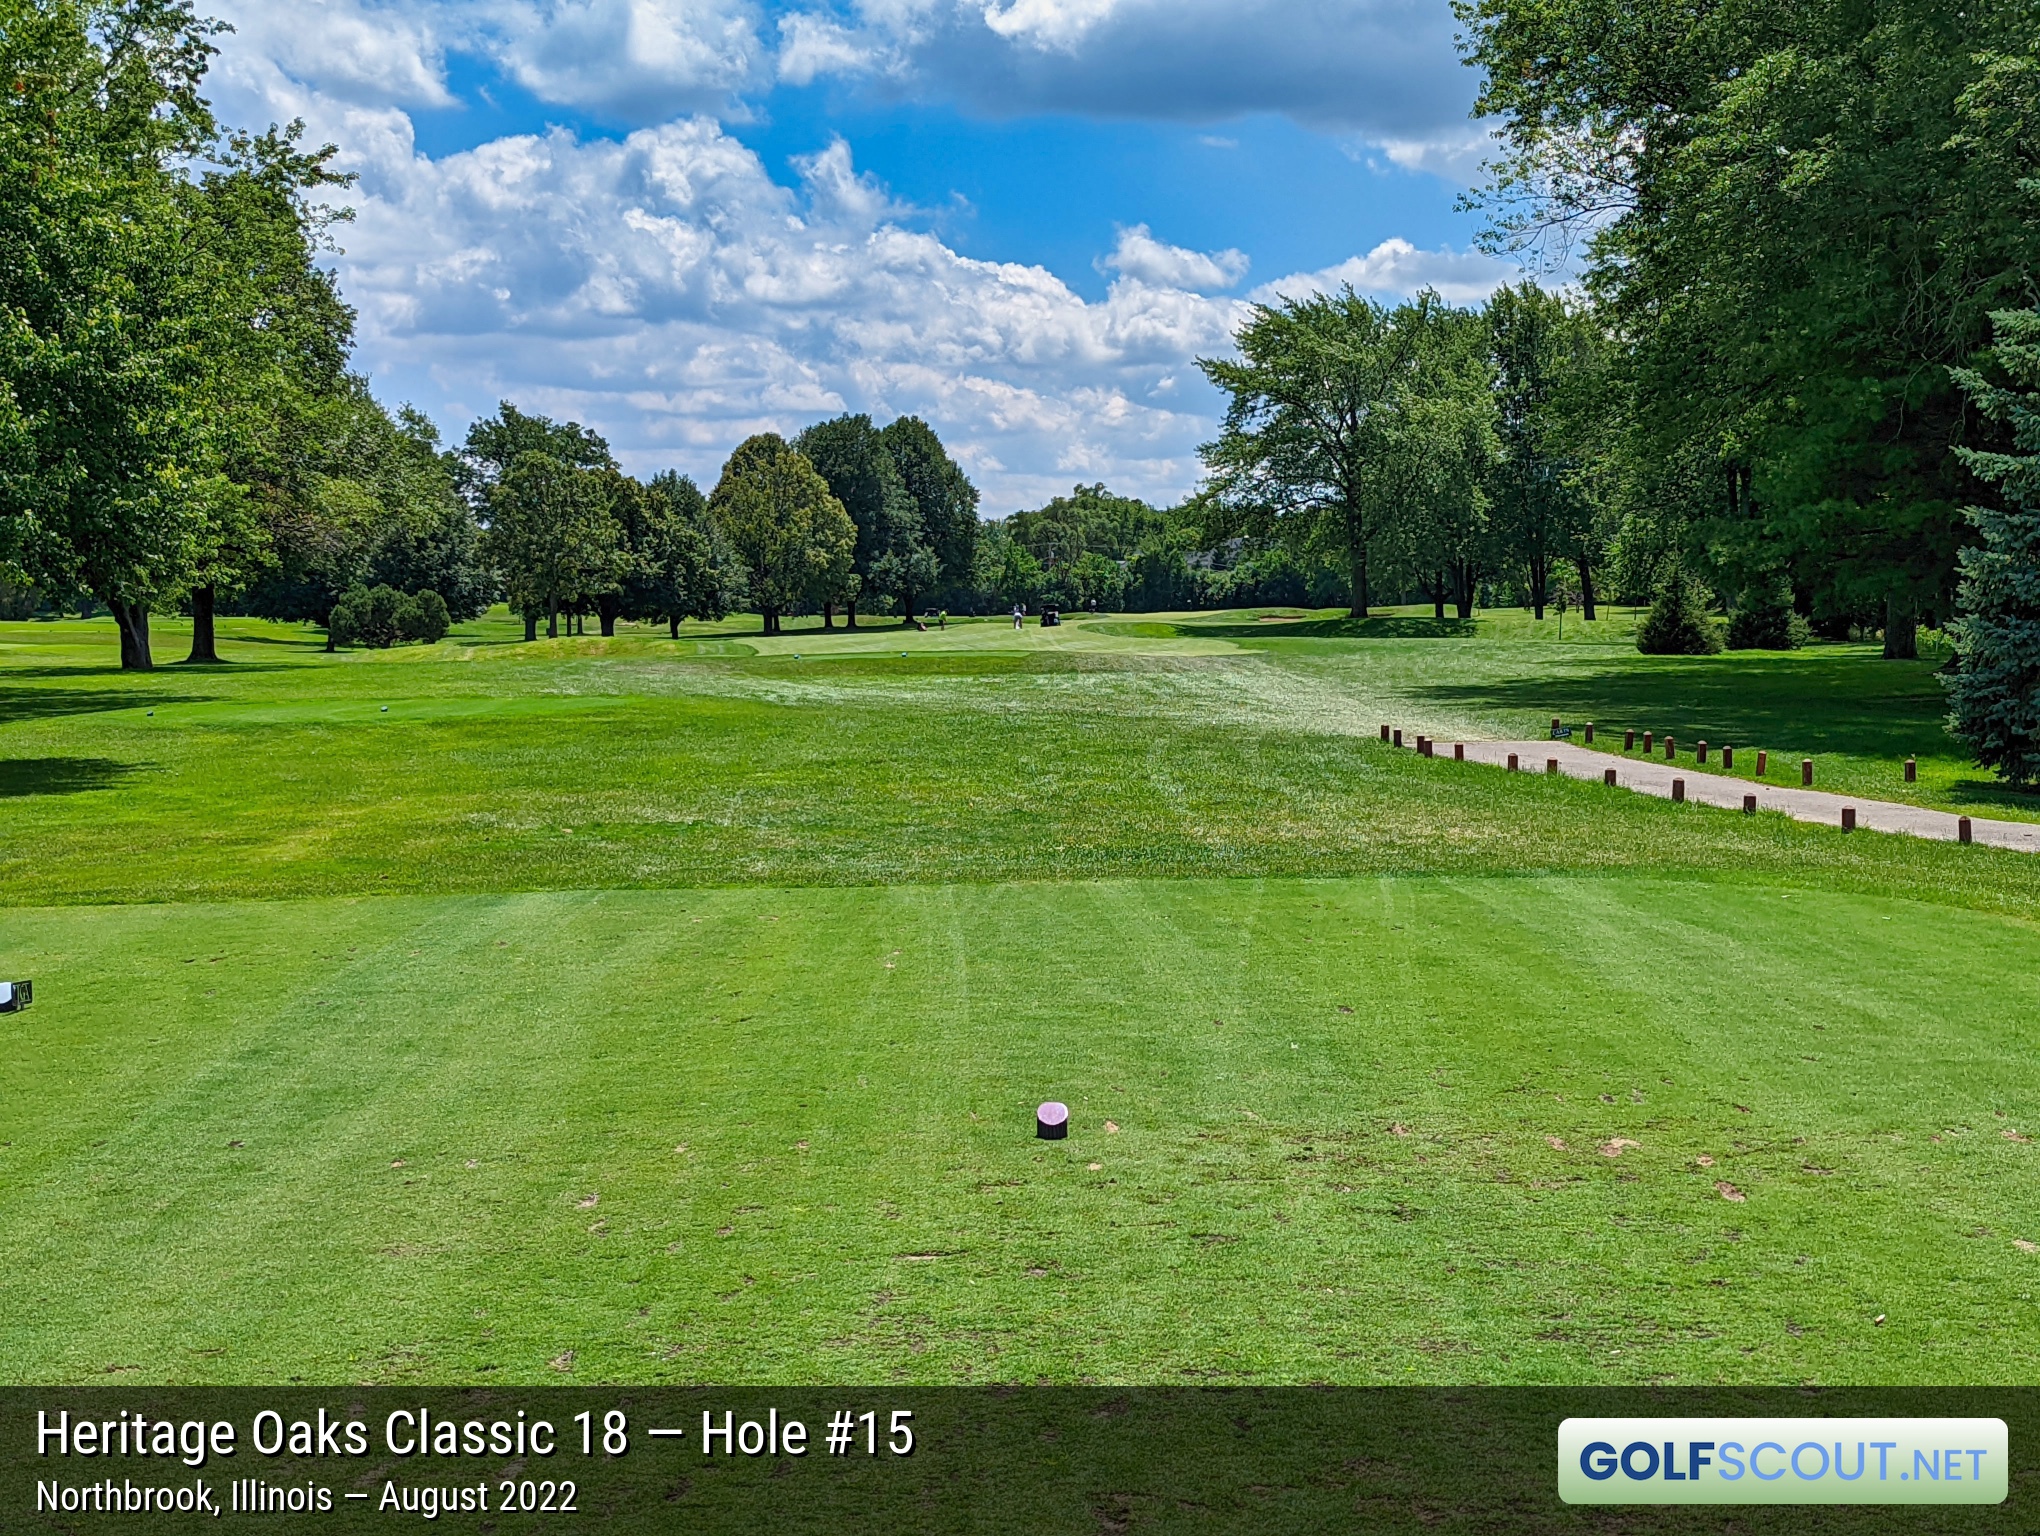 Photo of hole #15 at Heritage Oaks Golf Club - Classic 18 in Northbrook, Illinois. 